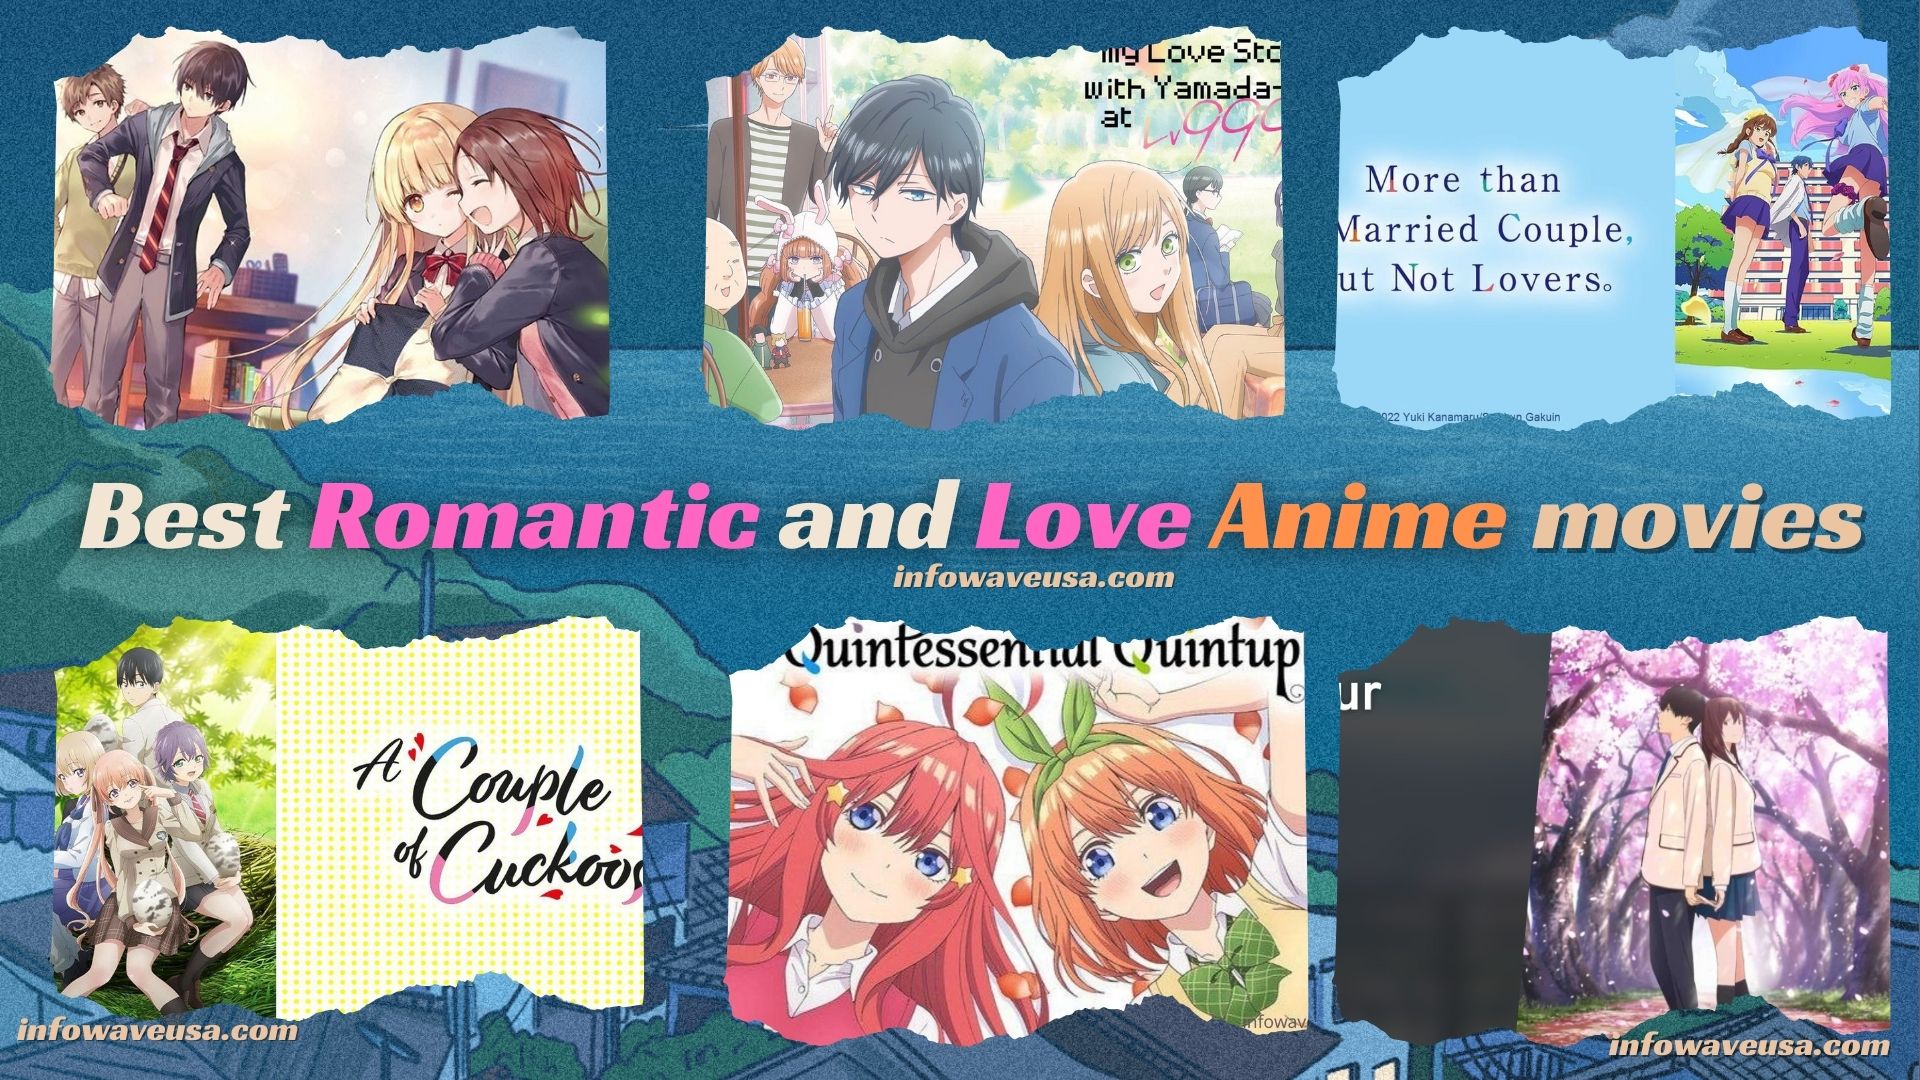 Best romantic anime movies to watch and download - Infowaveusa